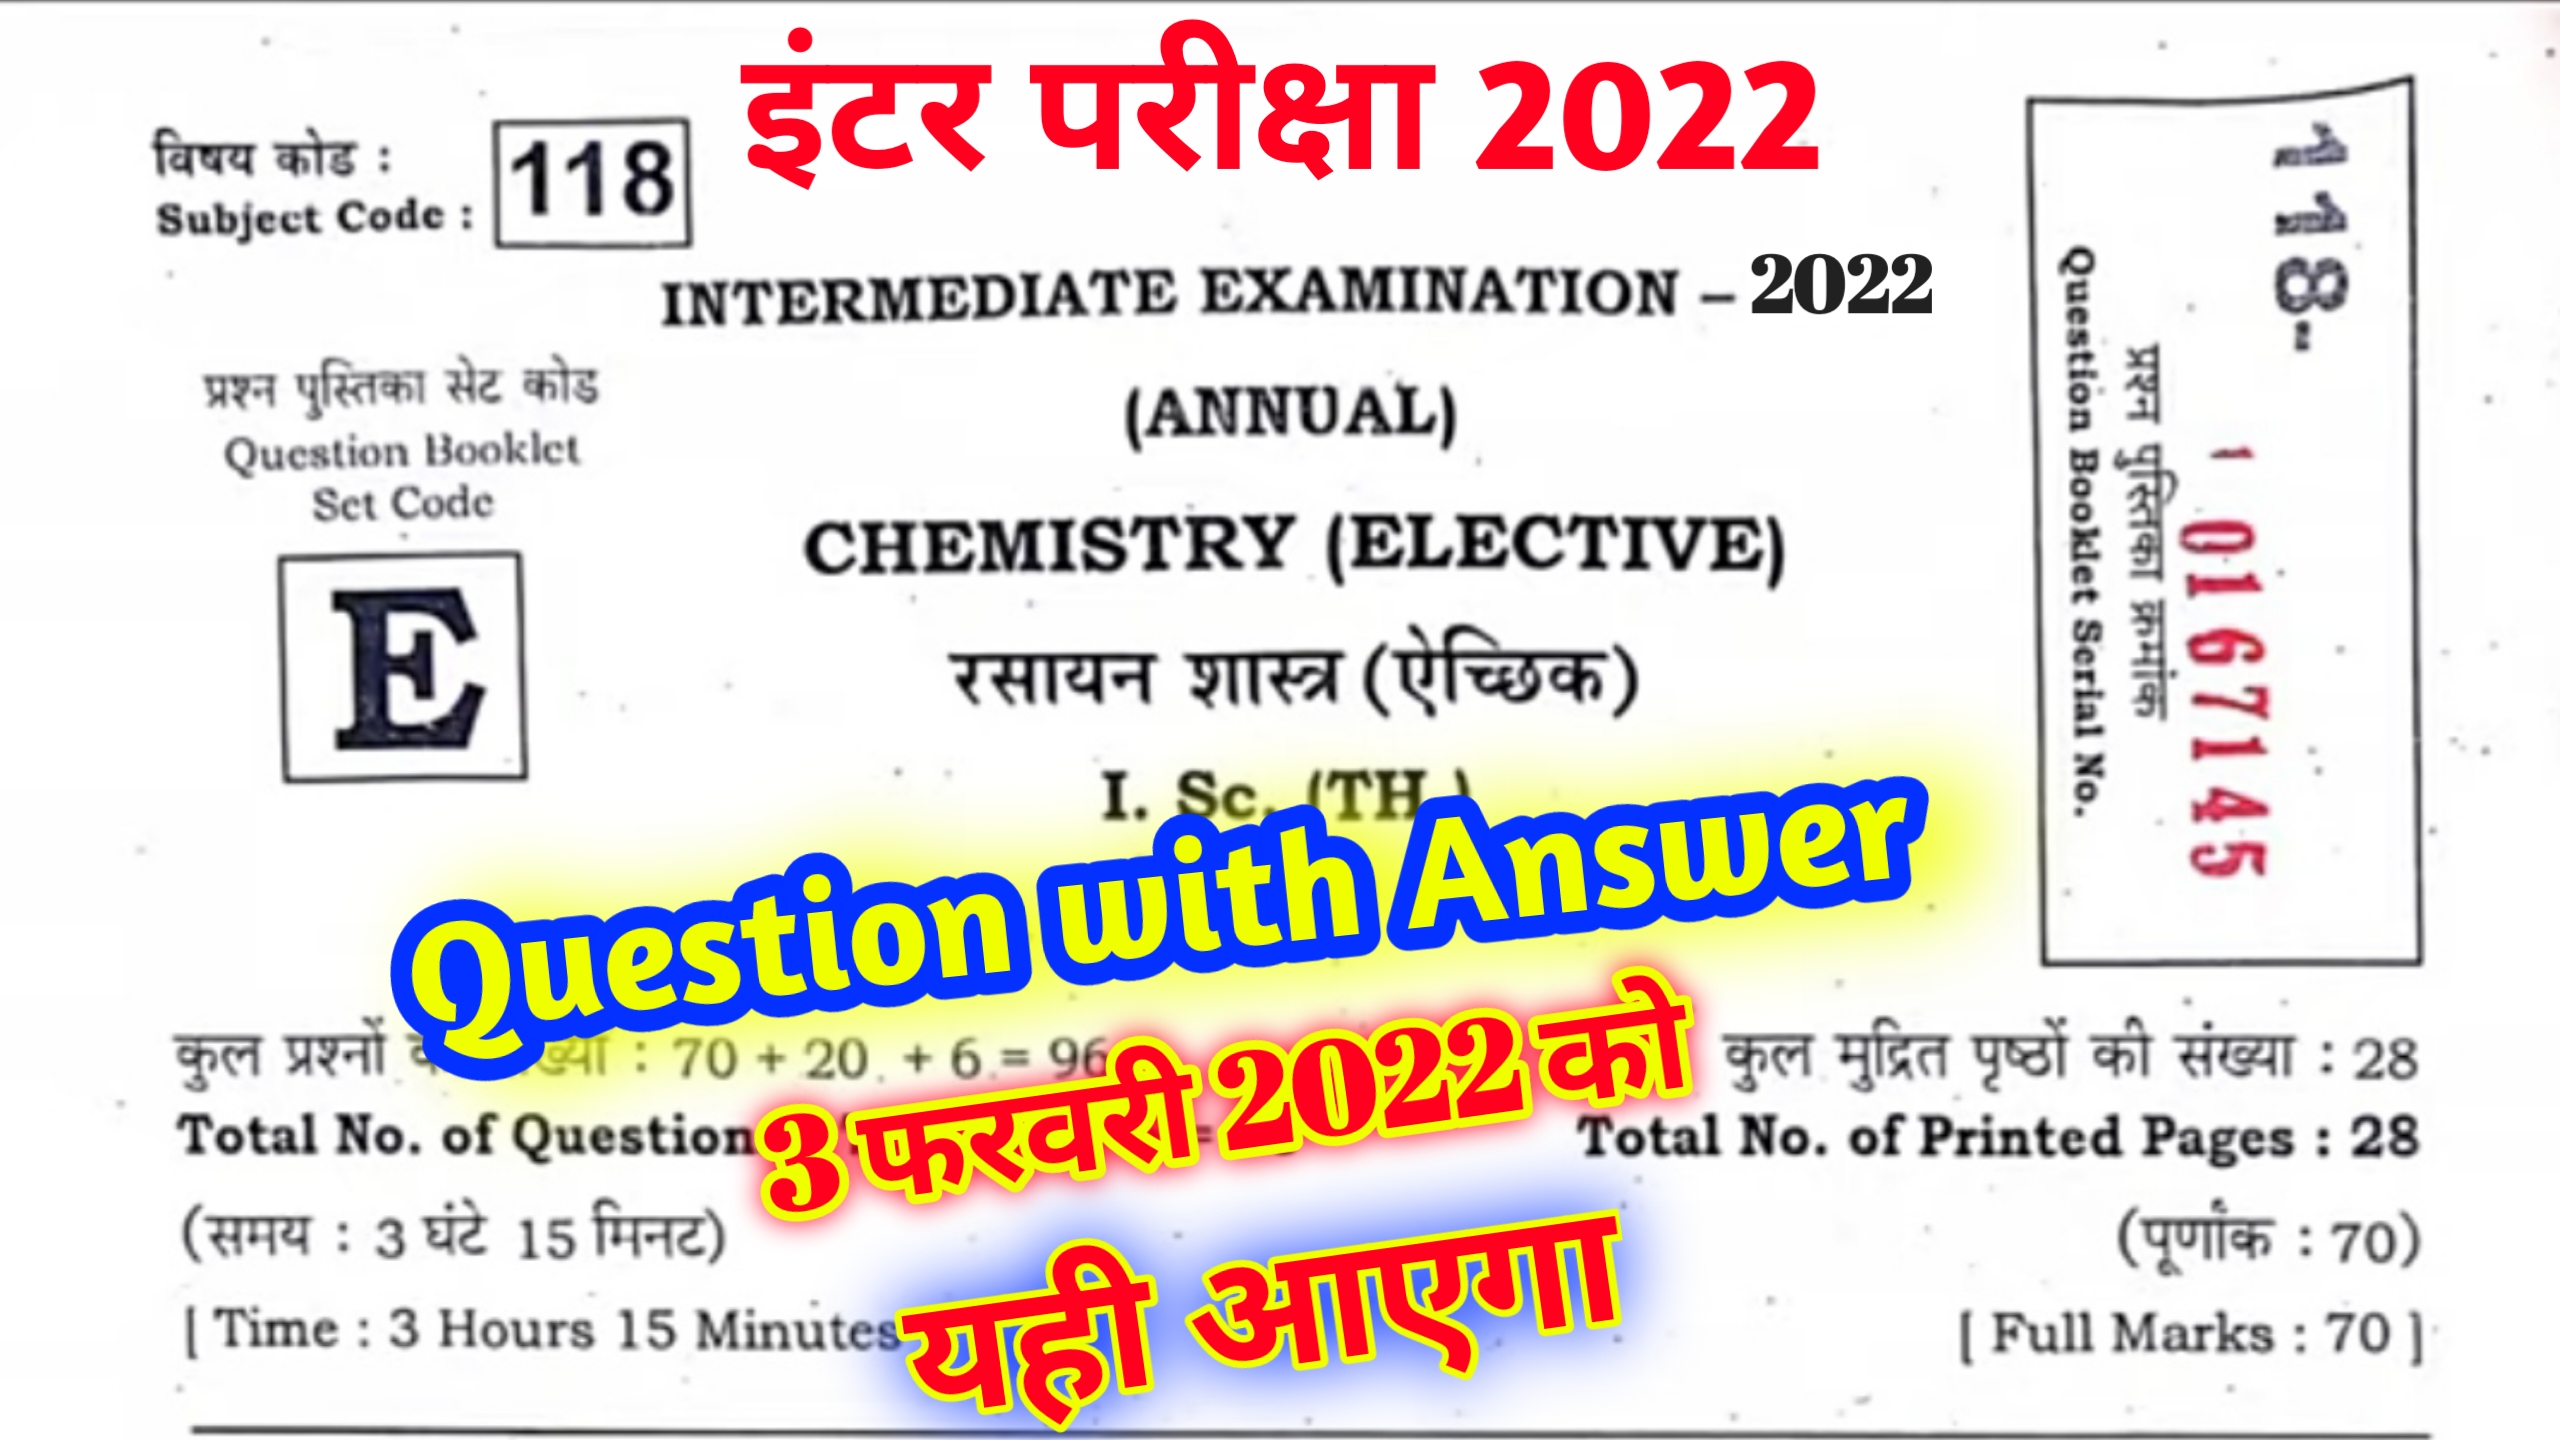 Bihar Board 12th Chemistry Answer Key 2022 3 February Science | 12th Chemistry Viral Question Paper 2022 3 February Science